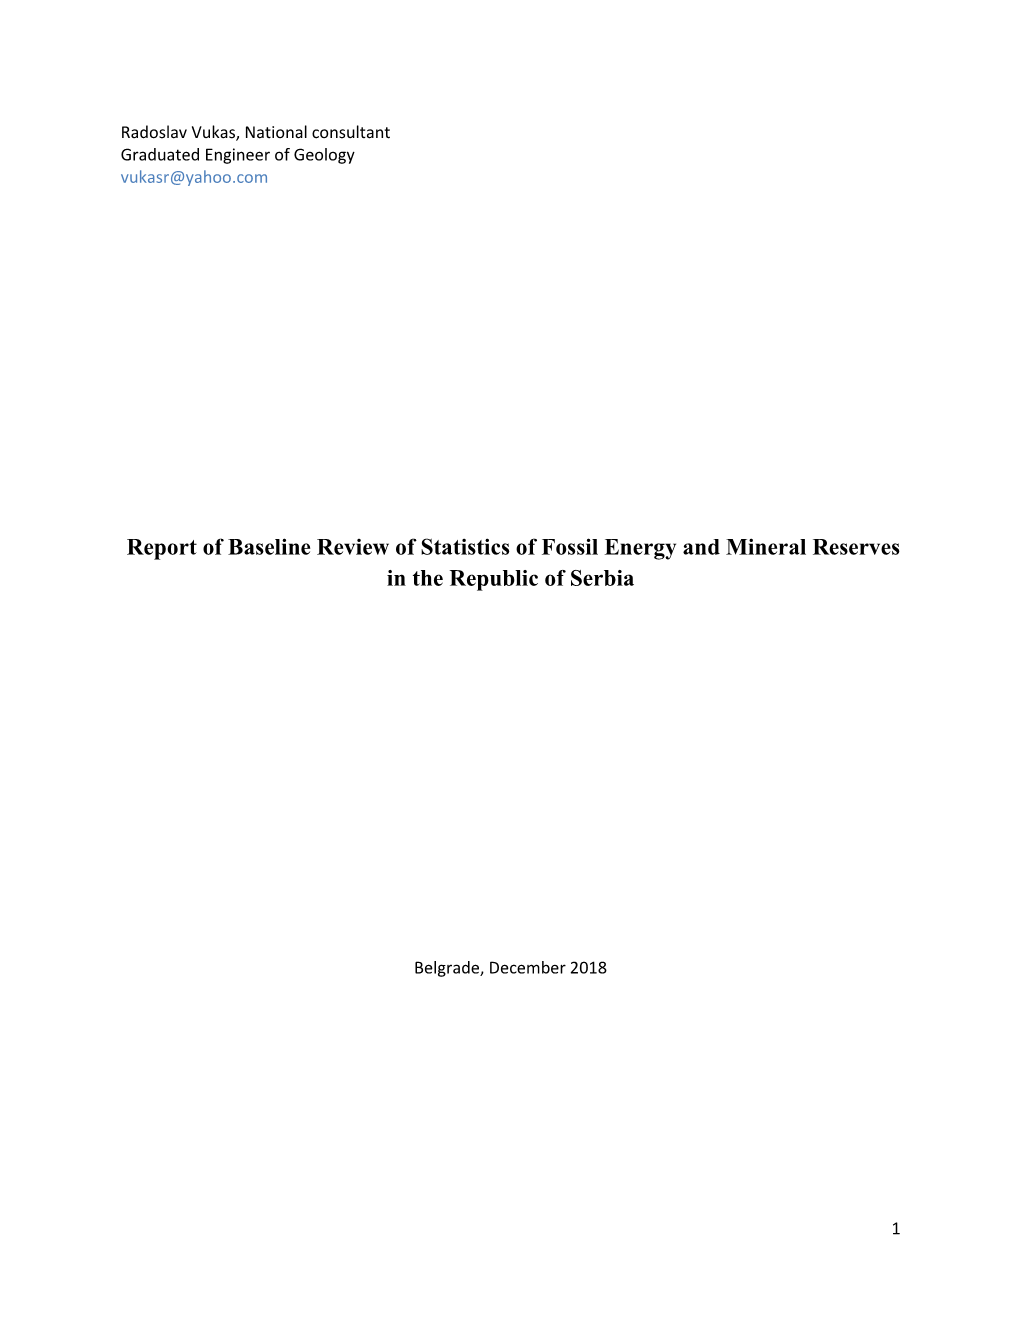 Report of Baseline Review of Statistics of Fossil Energy and Mineral Reserves in the Republic of Serbia